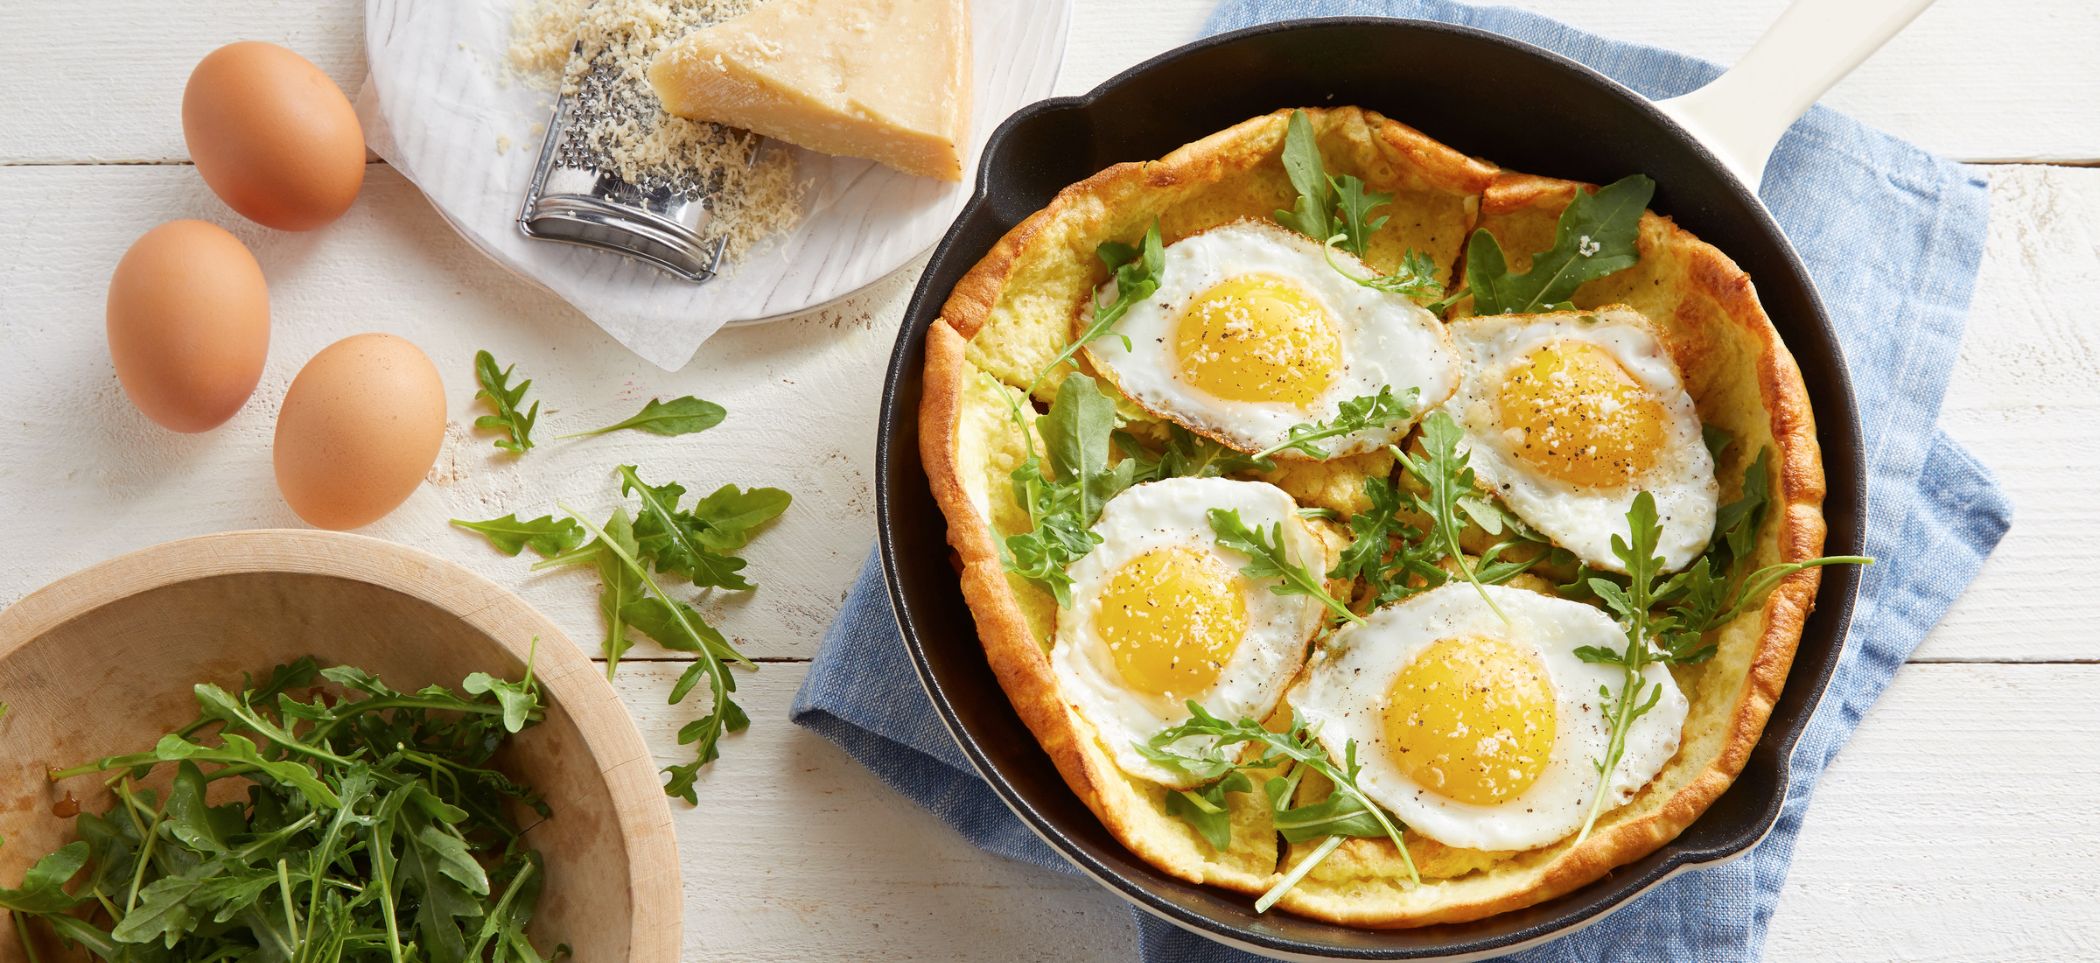 More data support eggs as part of healthy diet patterns for people at risk  for diabetes and cardiovascular disease - American Egg Board